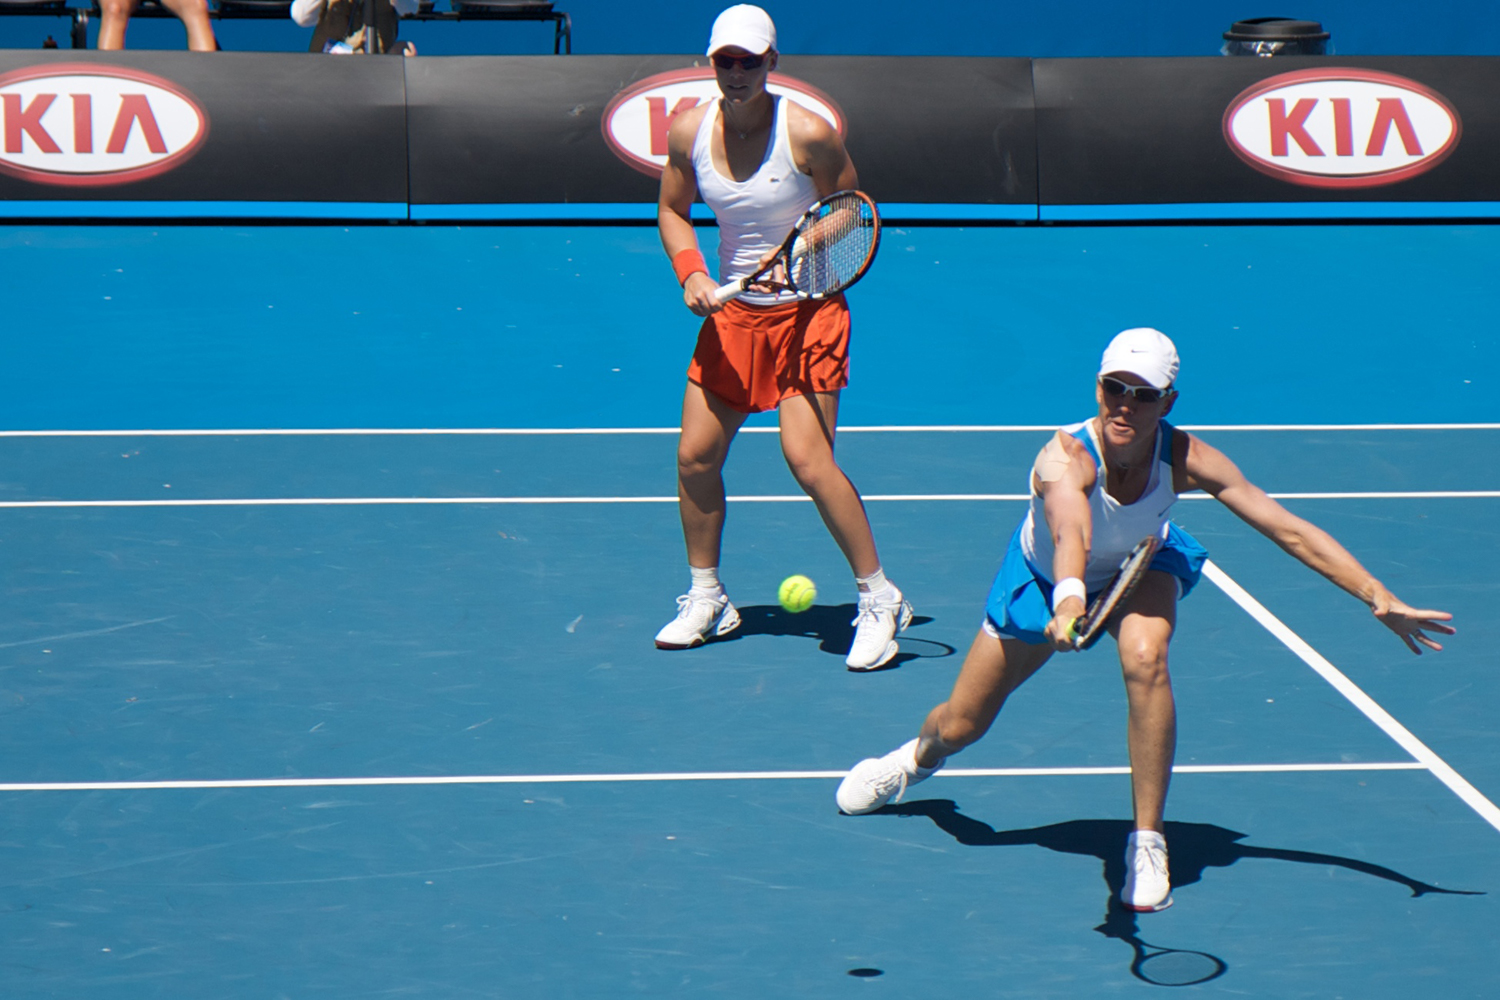 A doubles tennis team on the court